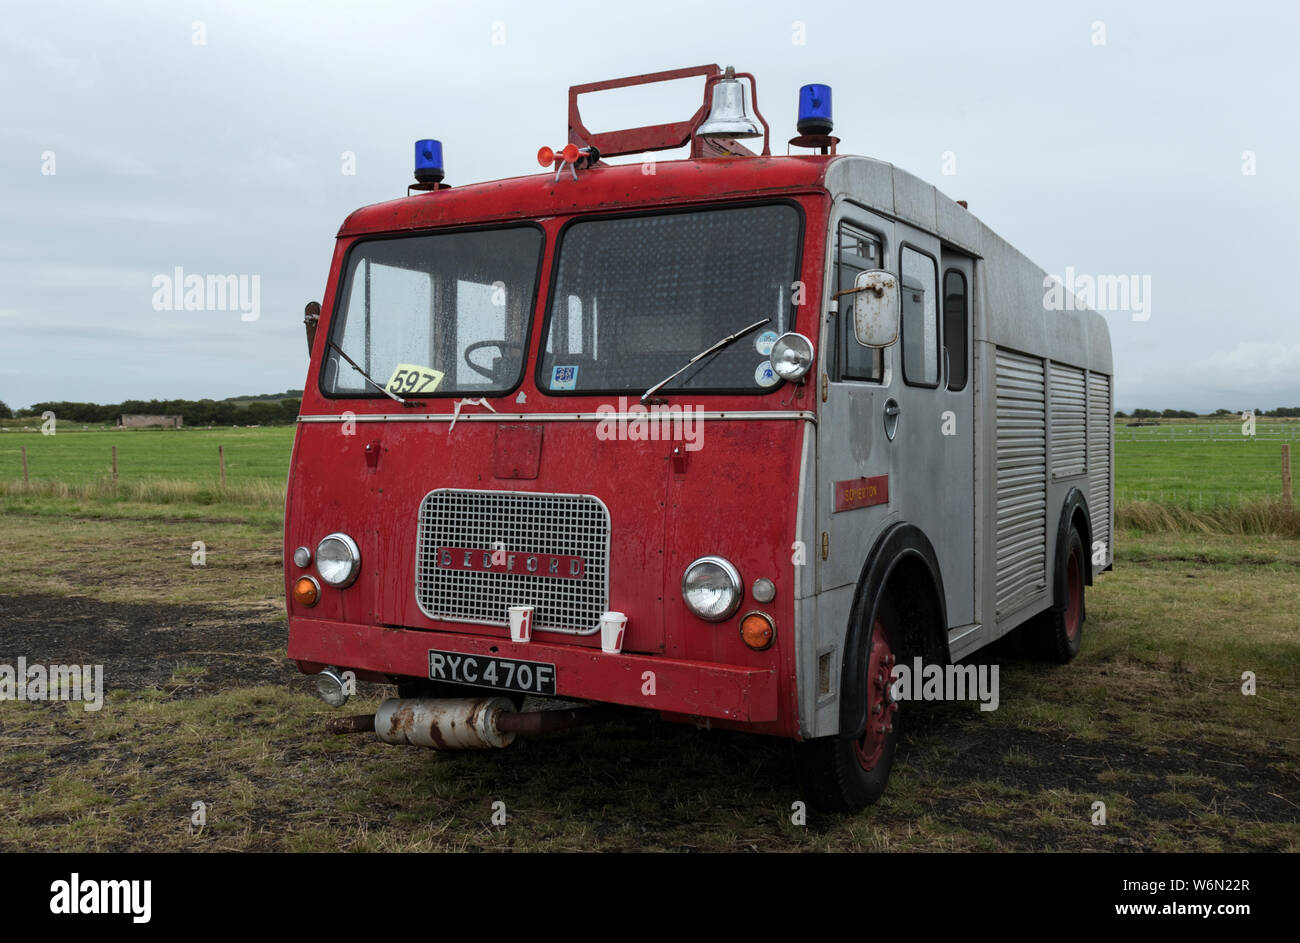 1968 Bedford TJ fire engine Stock Photo